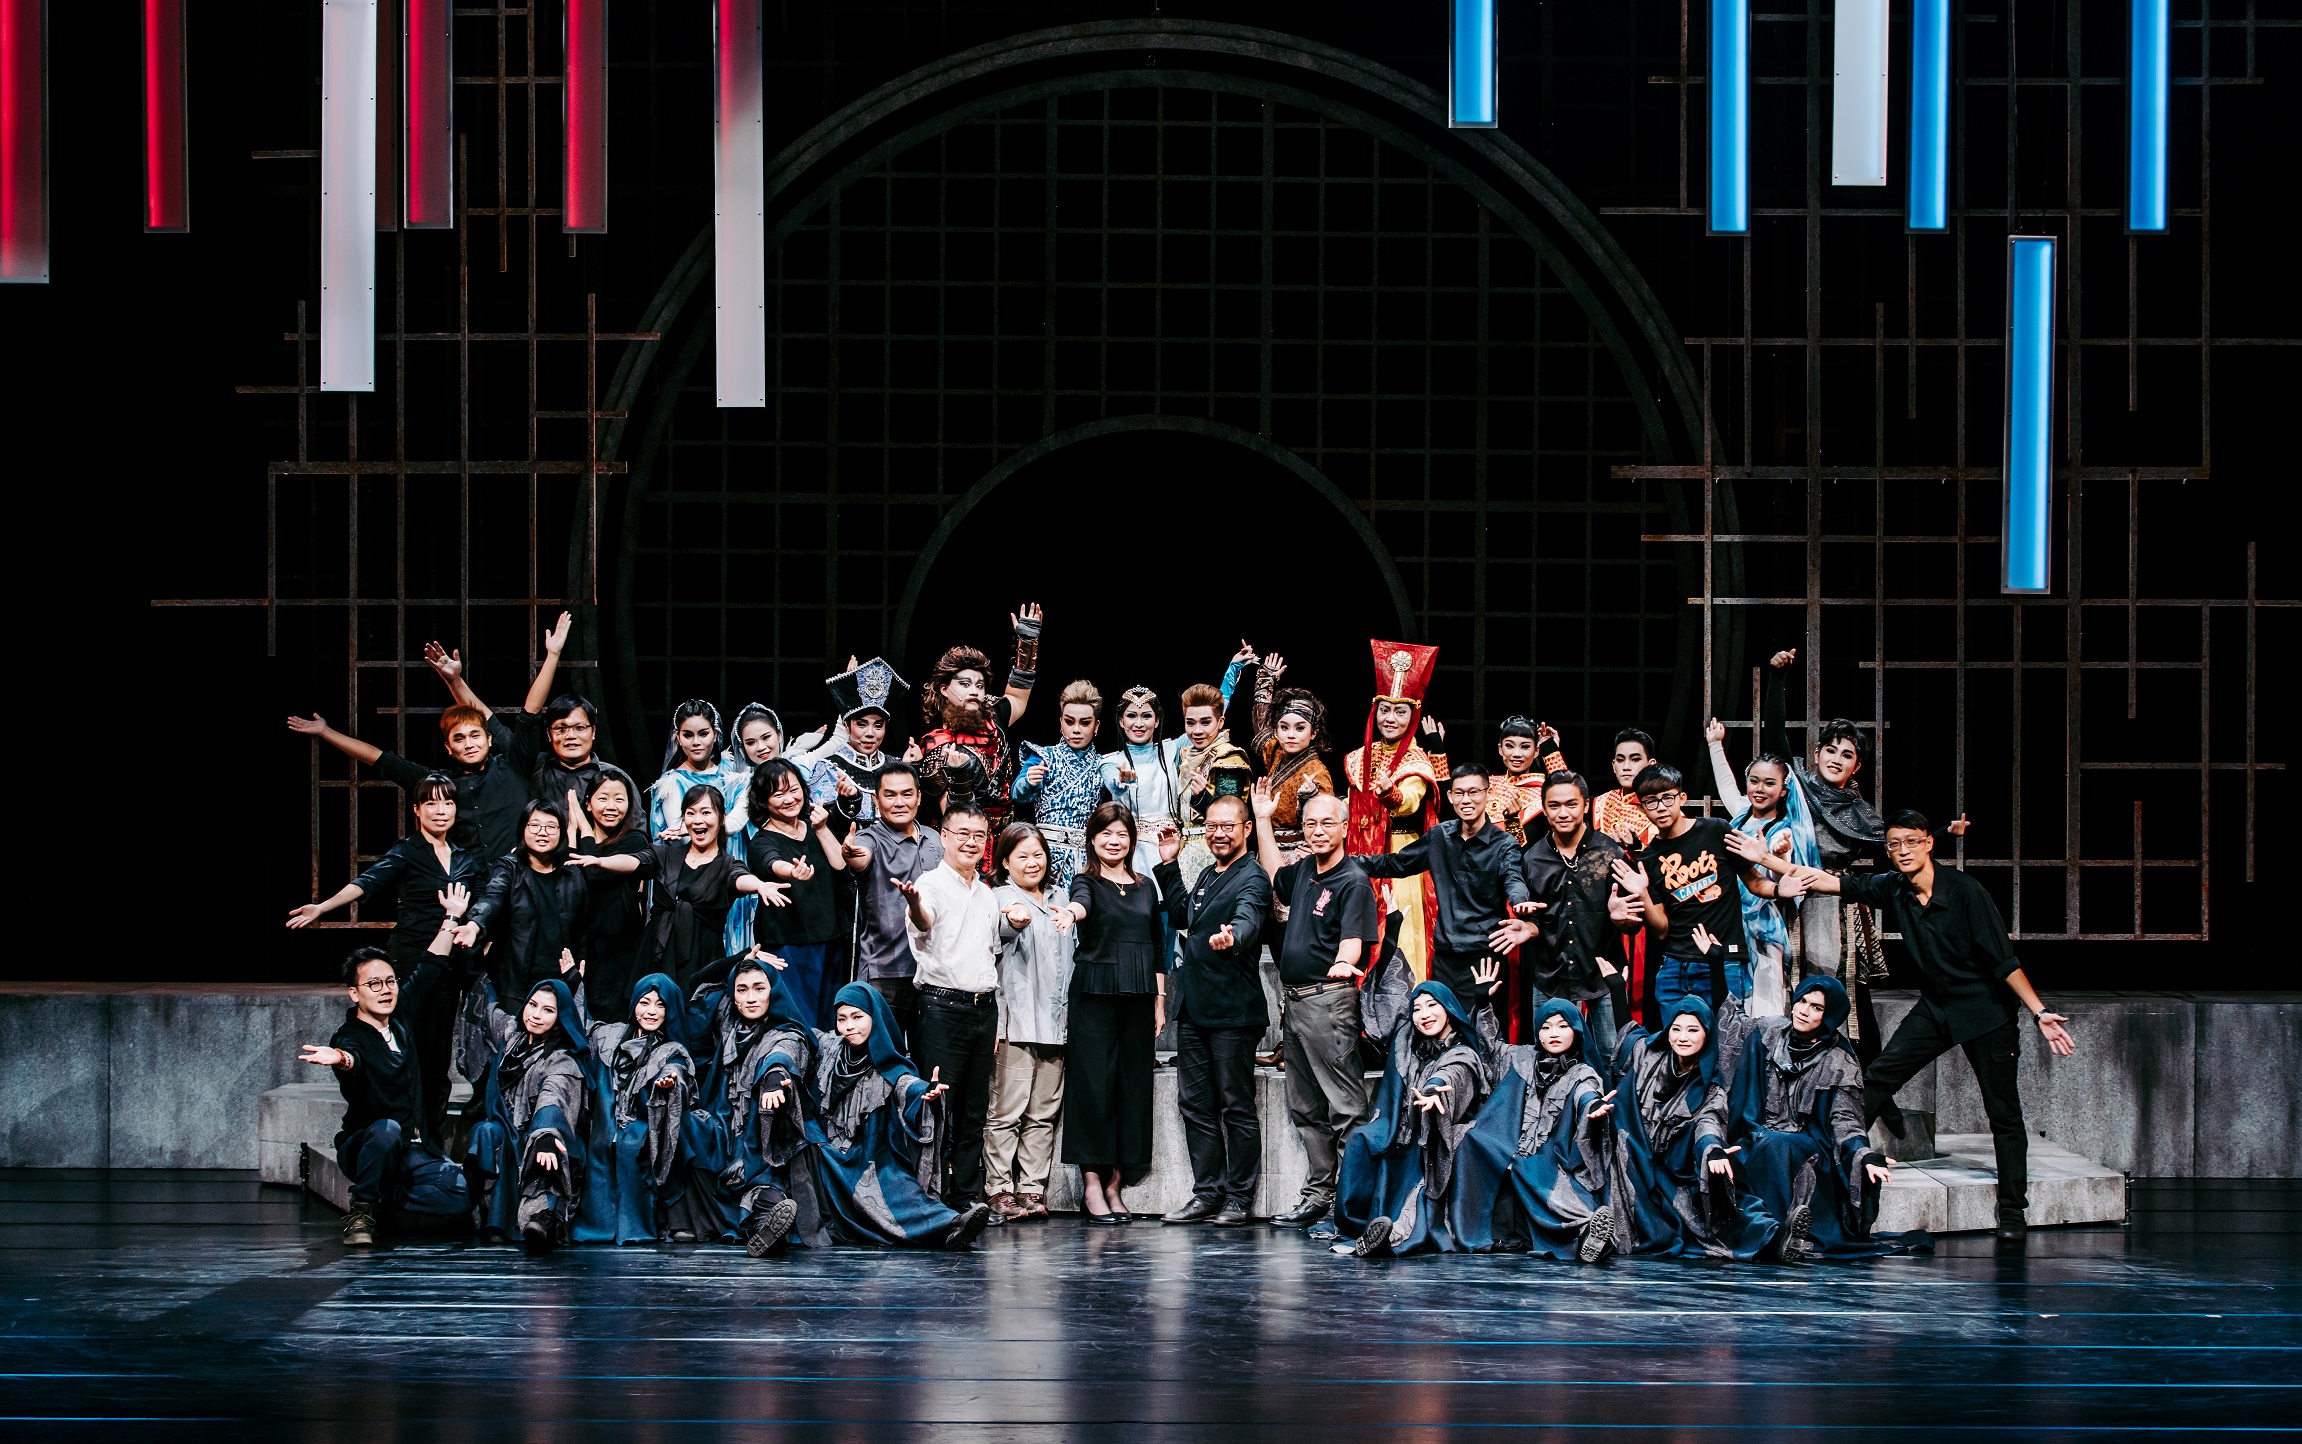 Photo:Director Xu Bo-ang stated: “This performance went through longer rehearsal times, involved work that was even more difficult than before, and inspected participating performers with professional standards, manifesting our efforts through the work. 